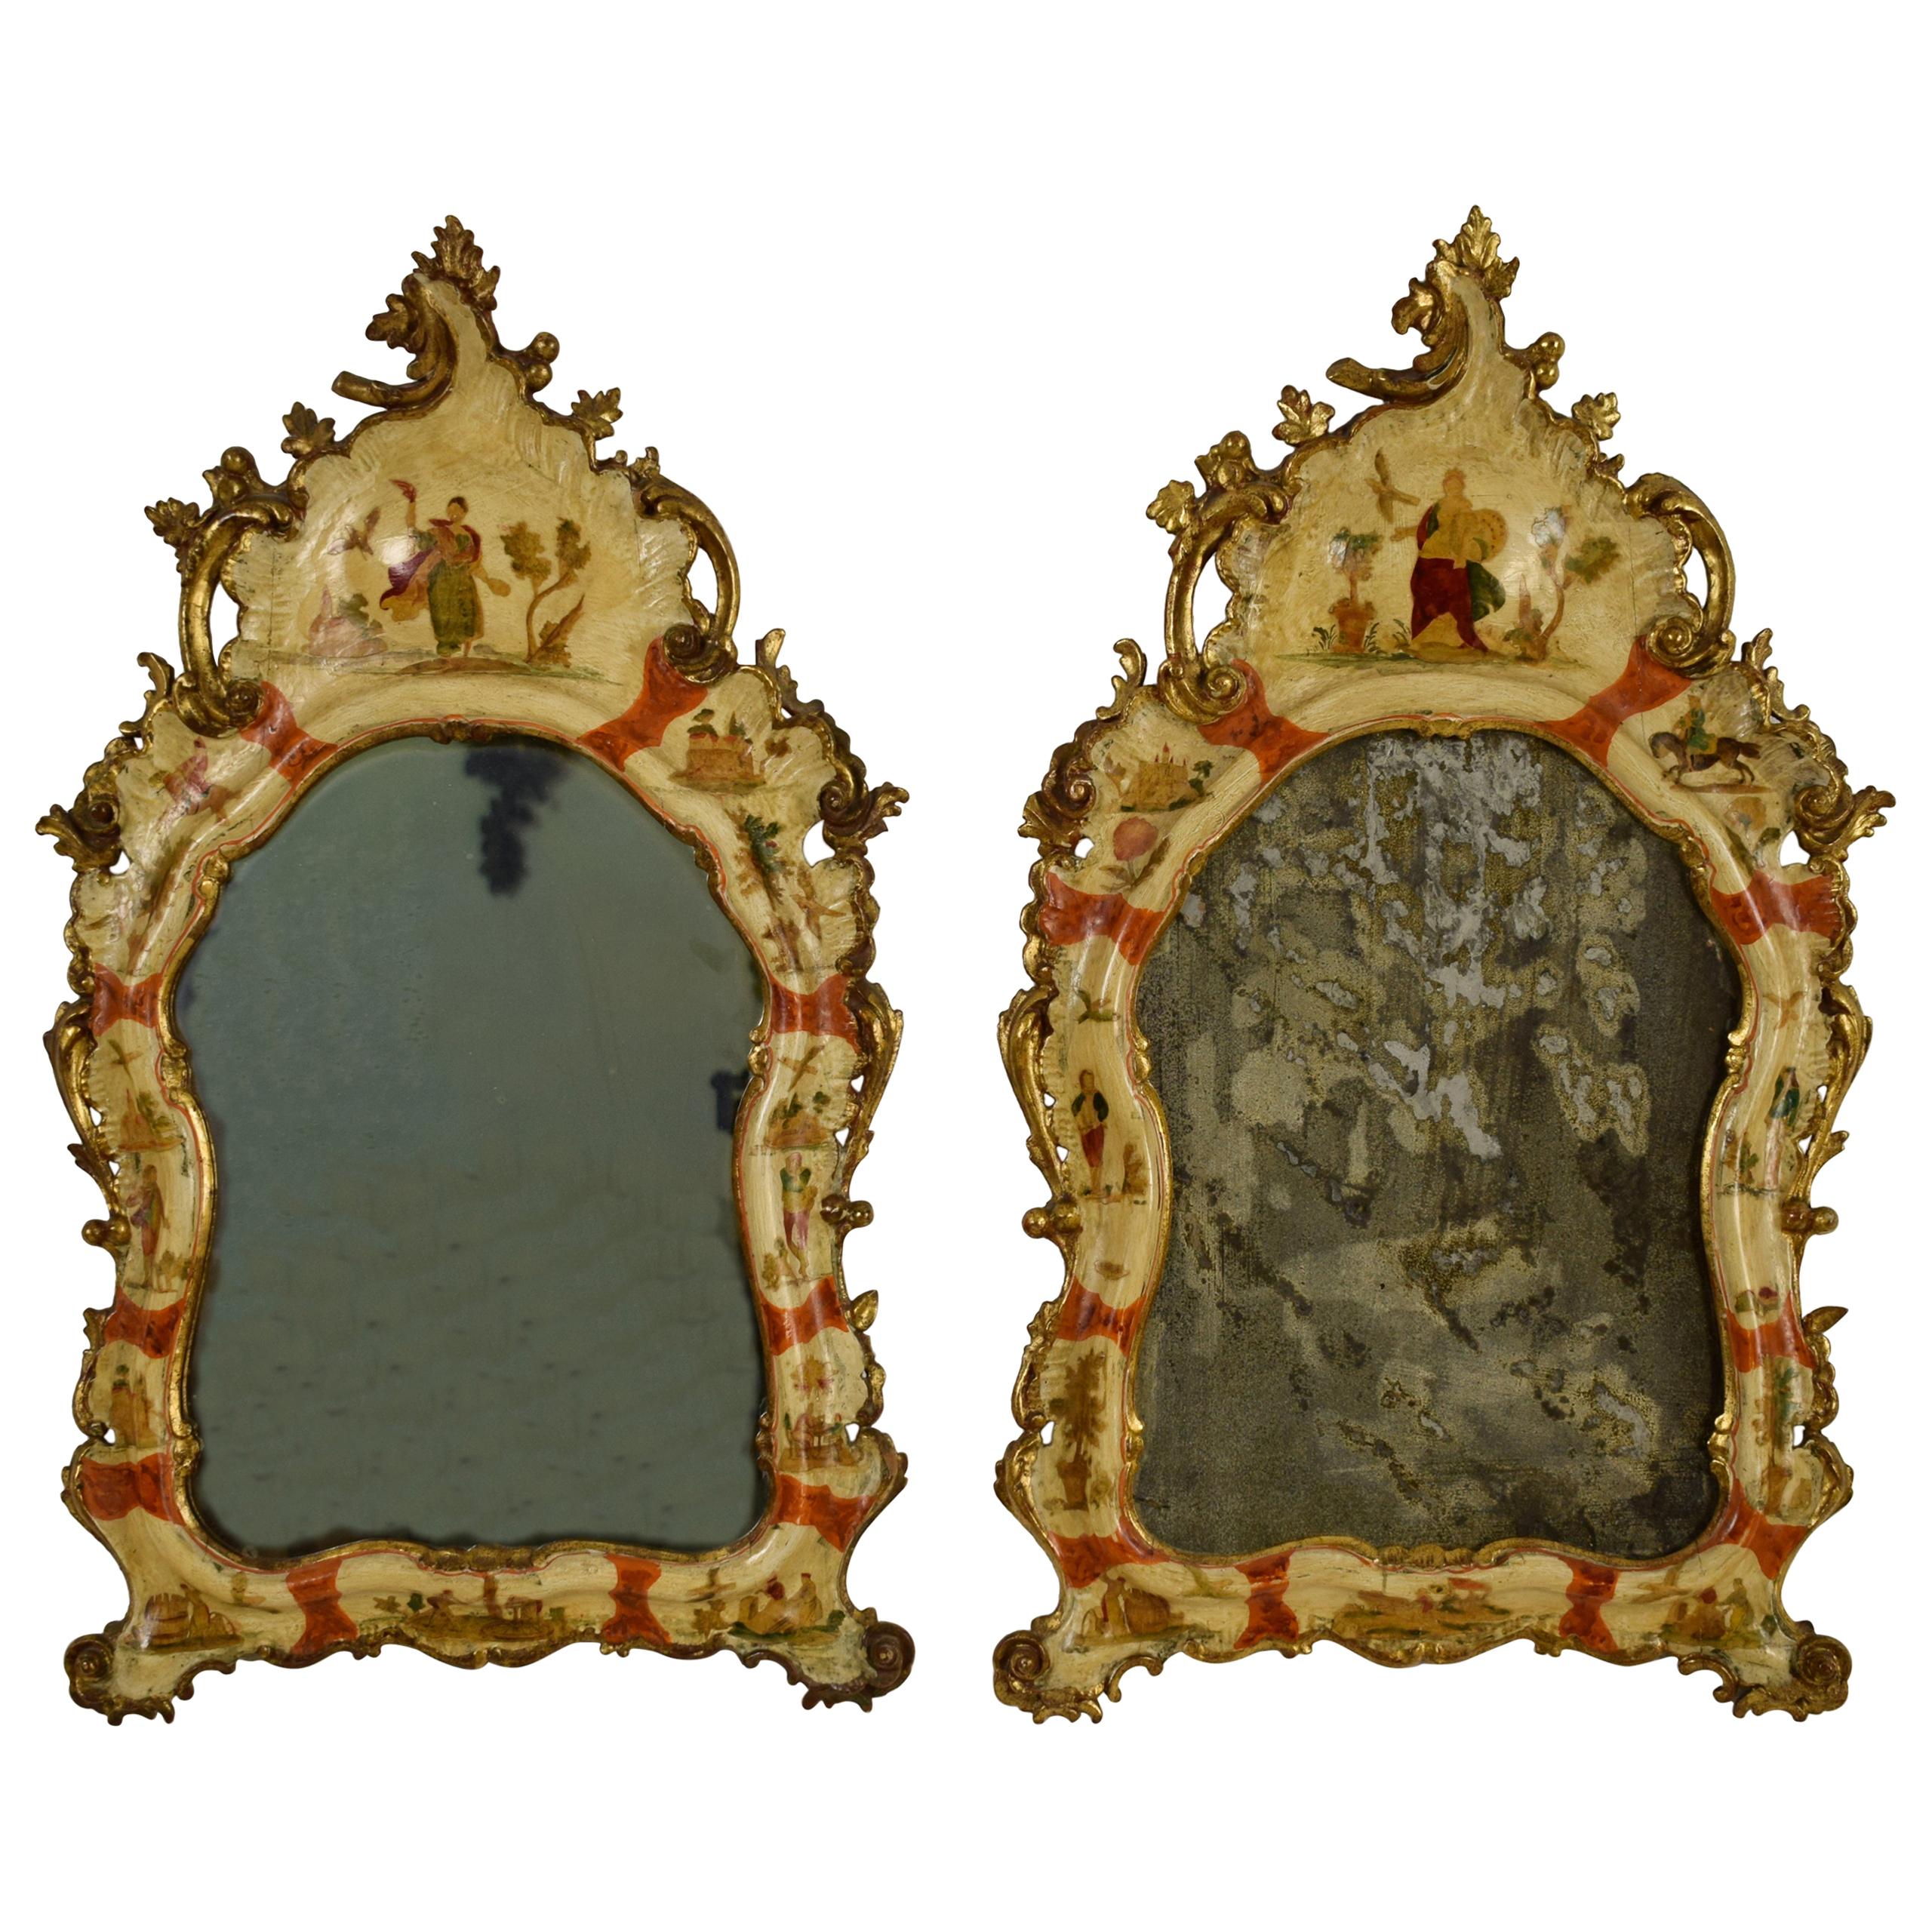 20th Century, Venice Arte Povera Lacquered Wood, Pair of Wall Mirrors 